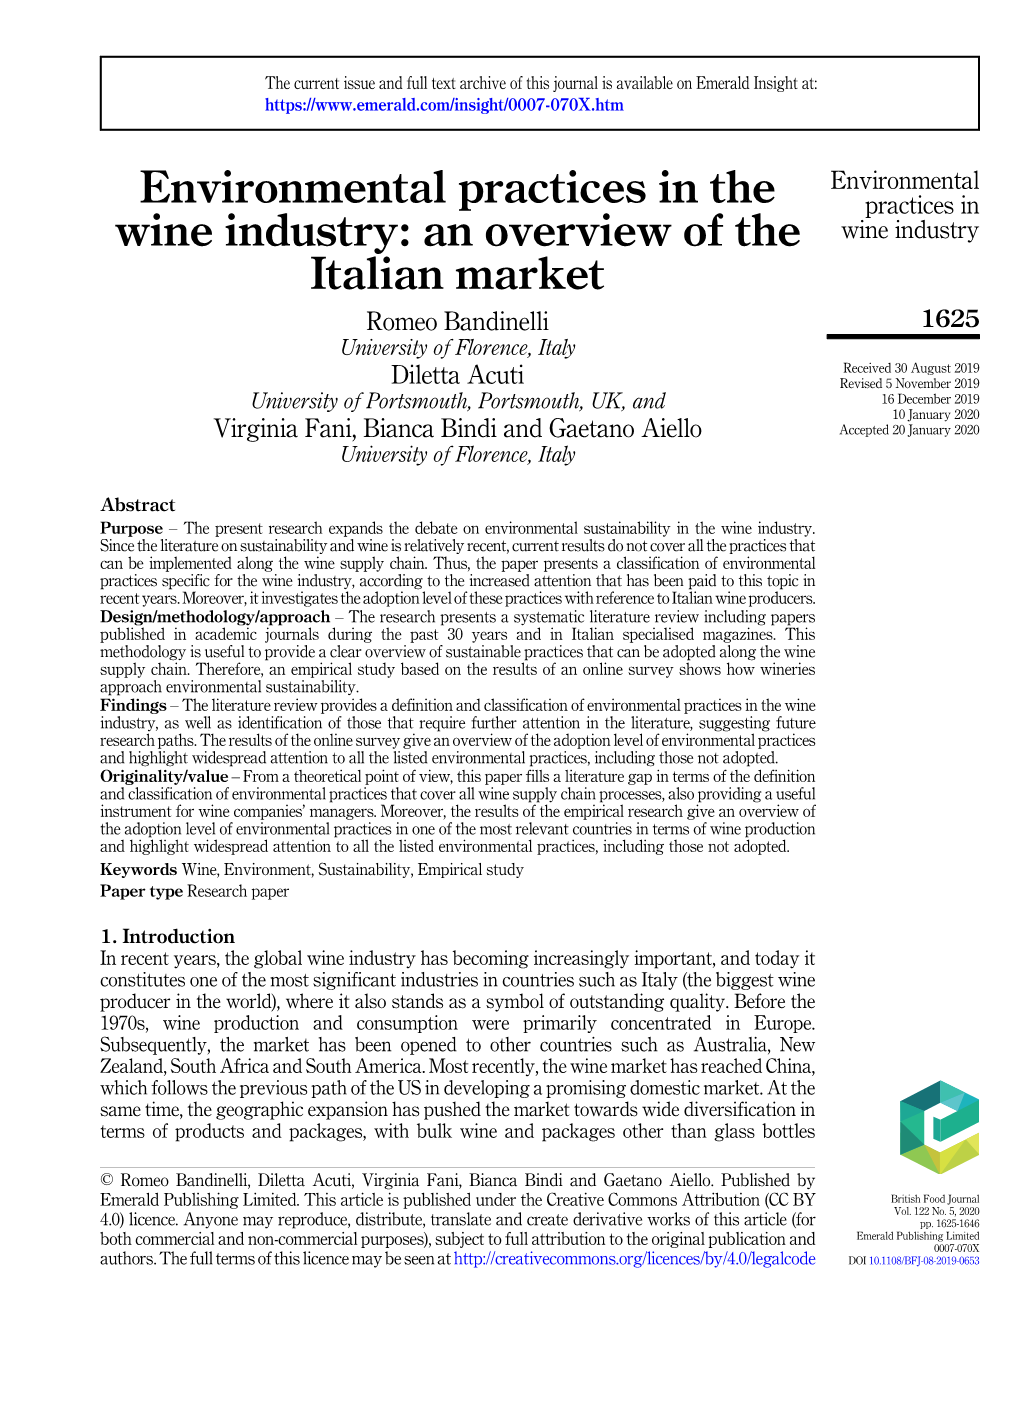 Environmental Practices in the Wine Industry, As Well As Identification of Those That Require Further Attention in the Literature, Suggesting Future Research Paths